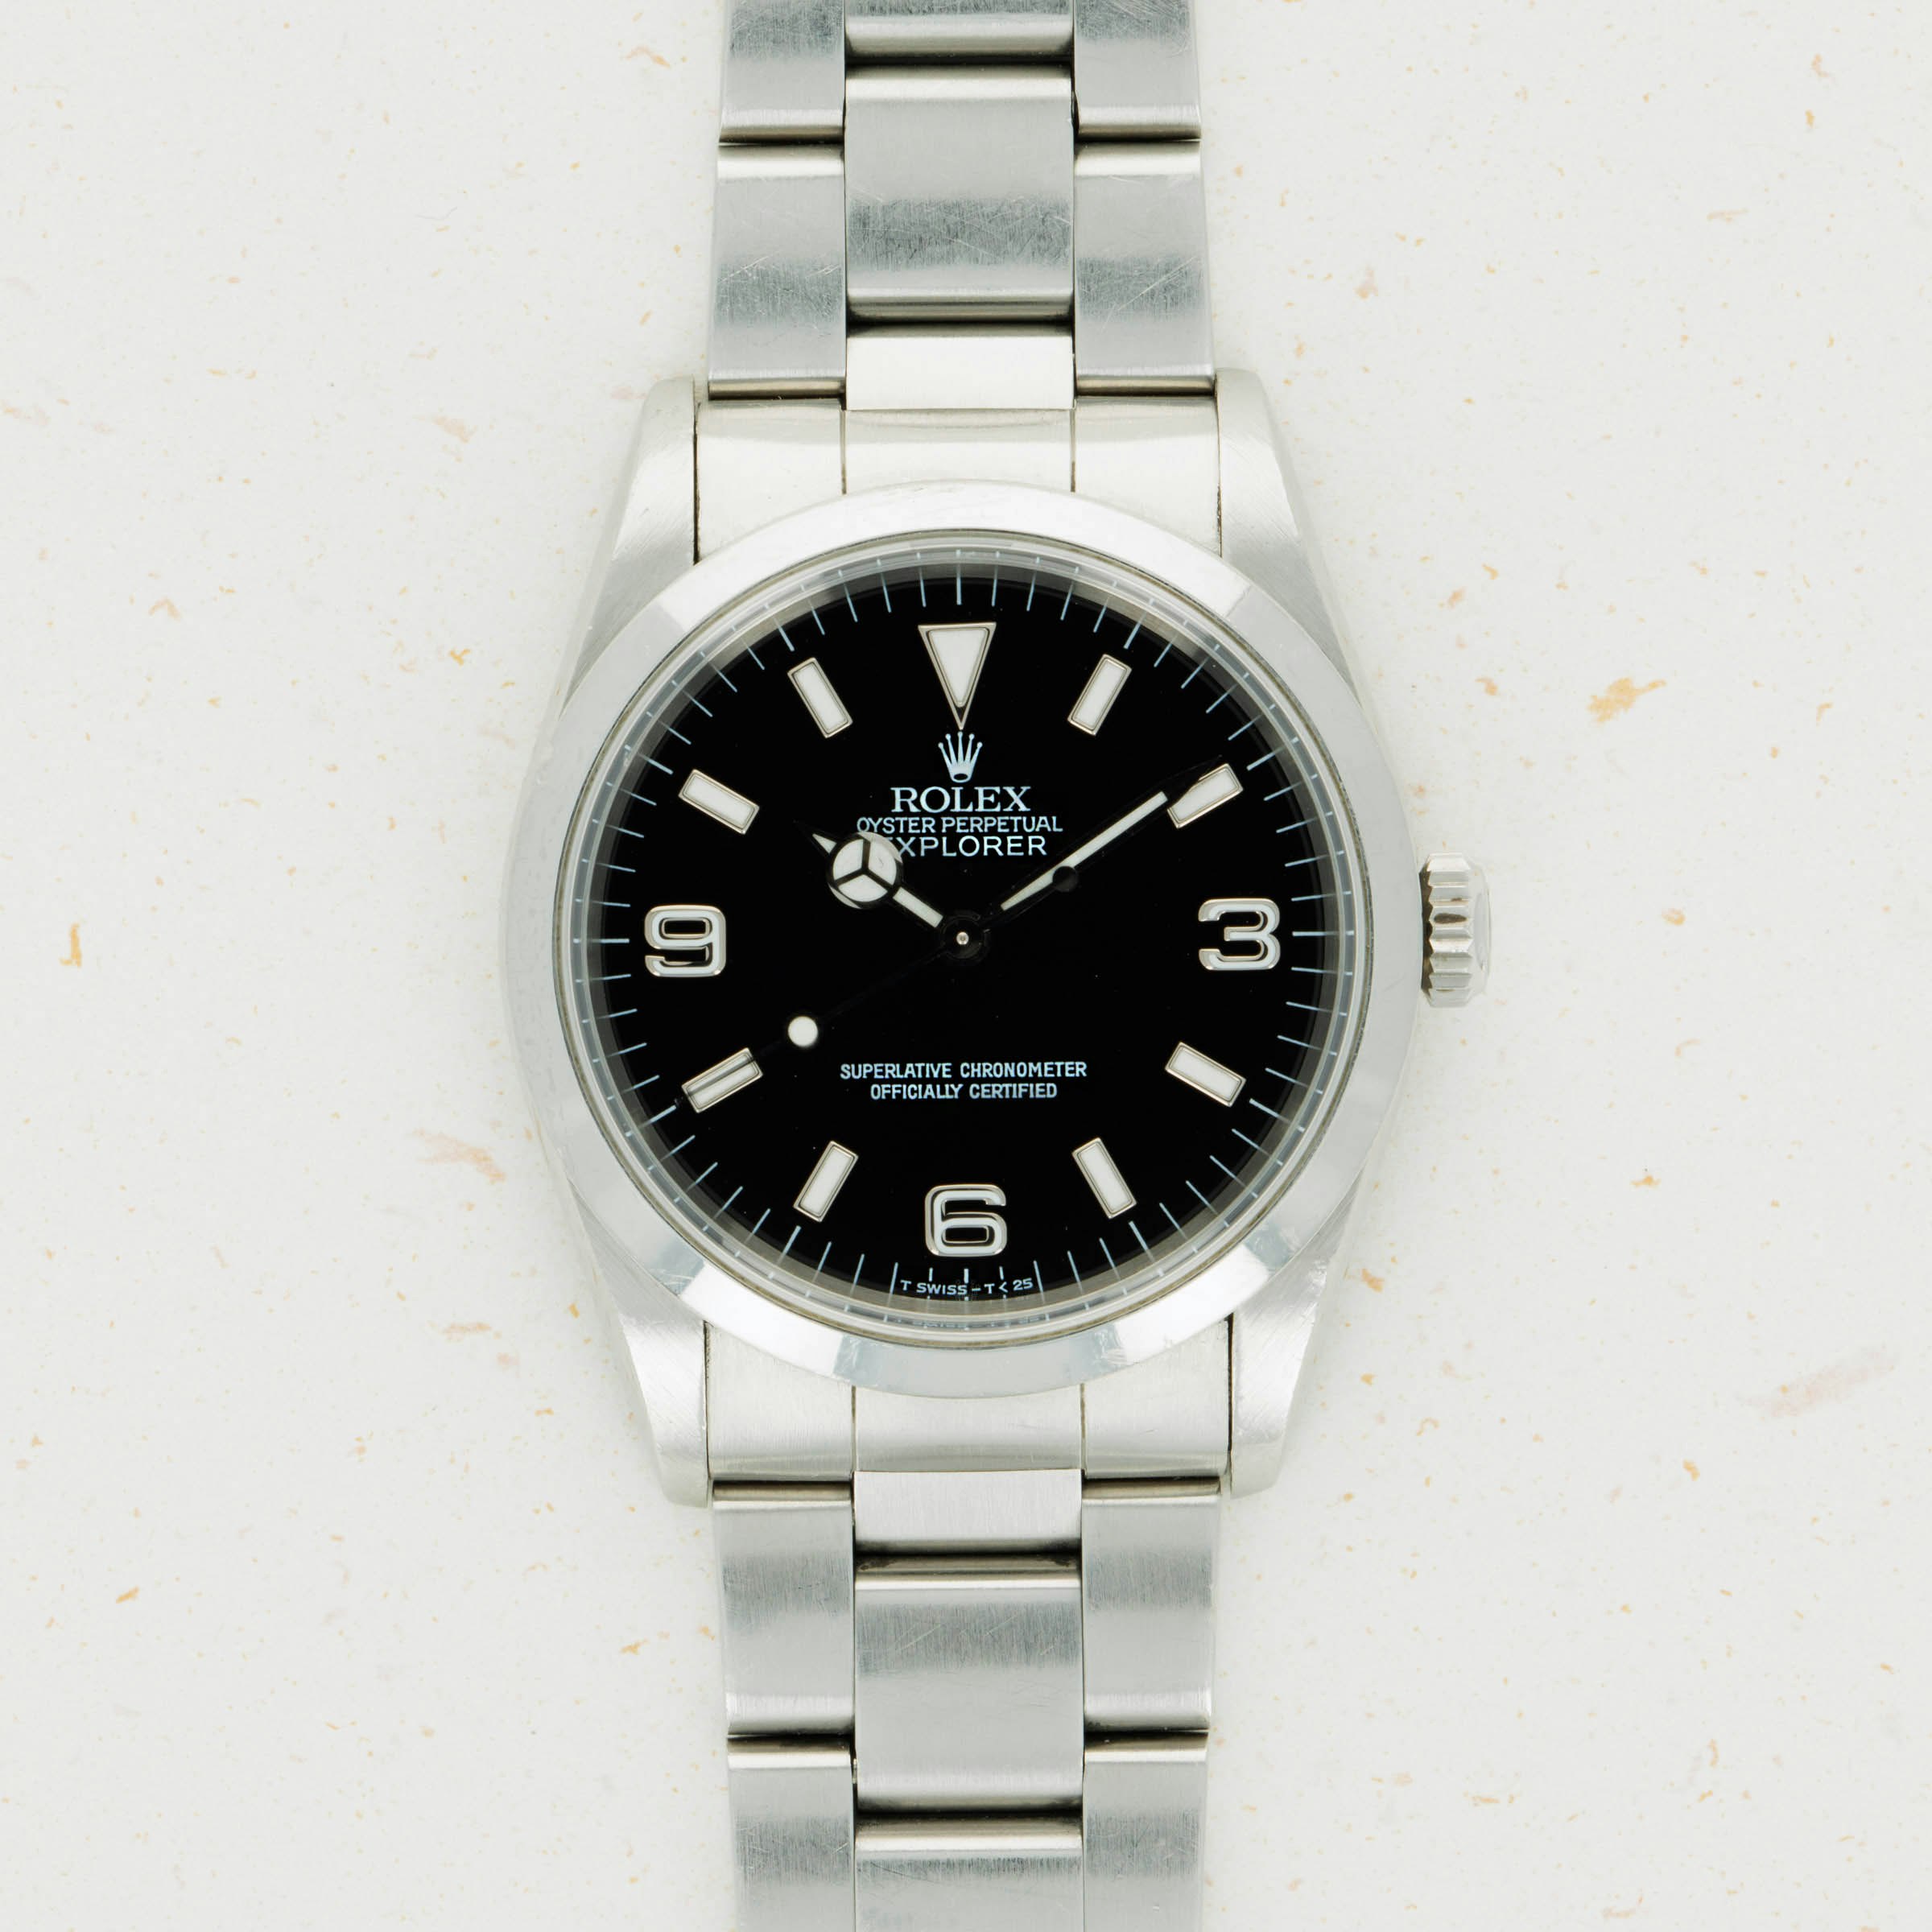 Thumbnail for Rolex Oyster Perpetual Explorer I 14270